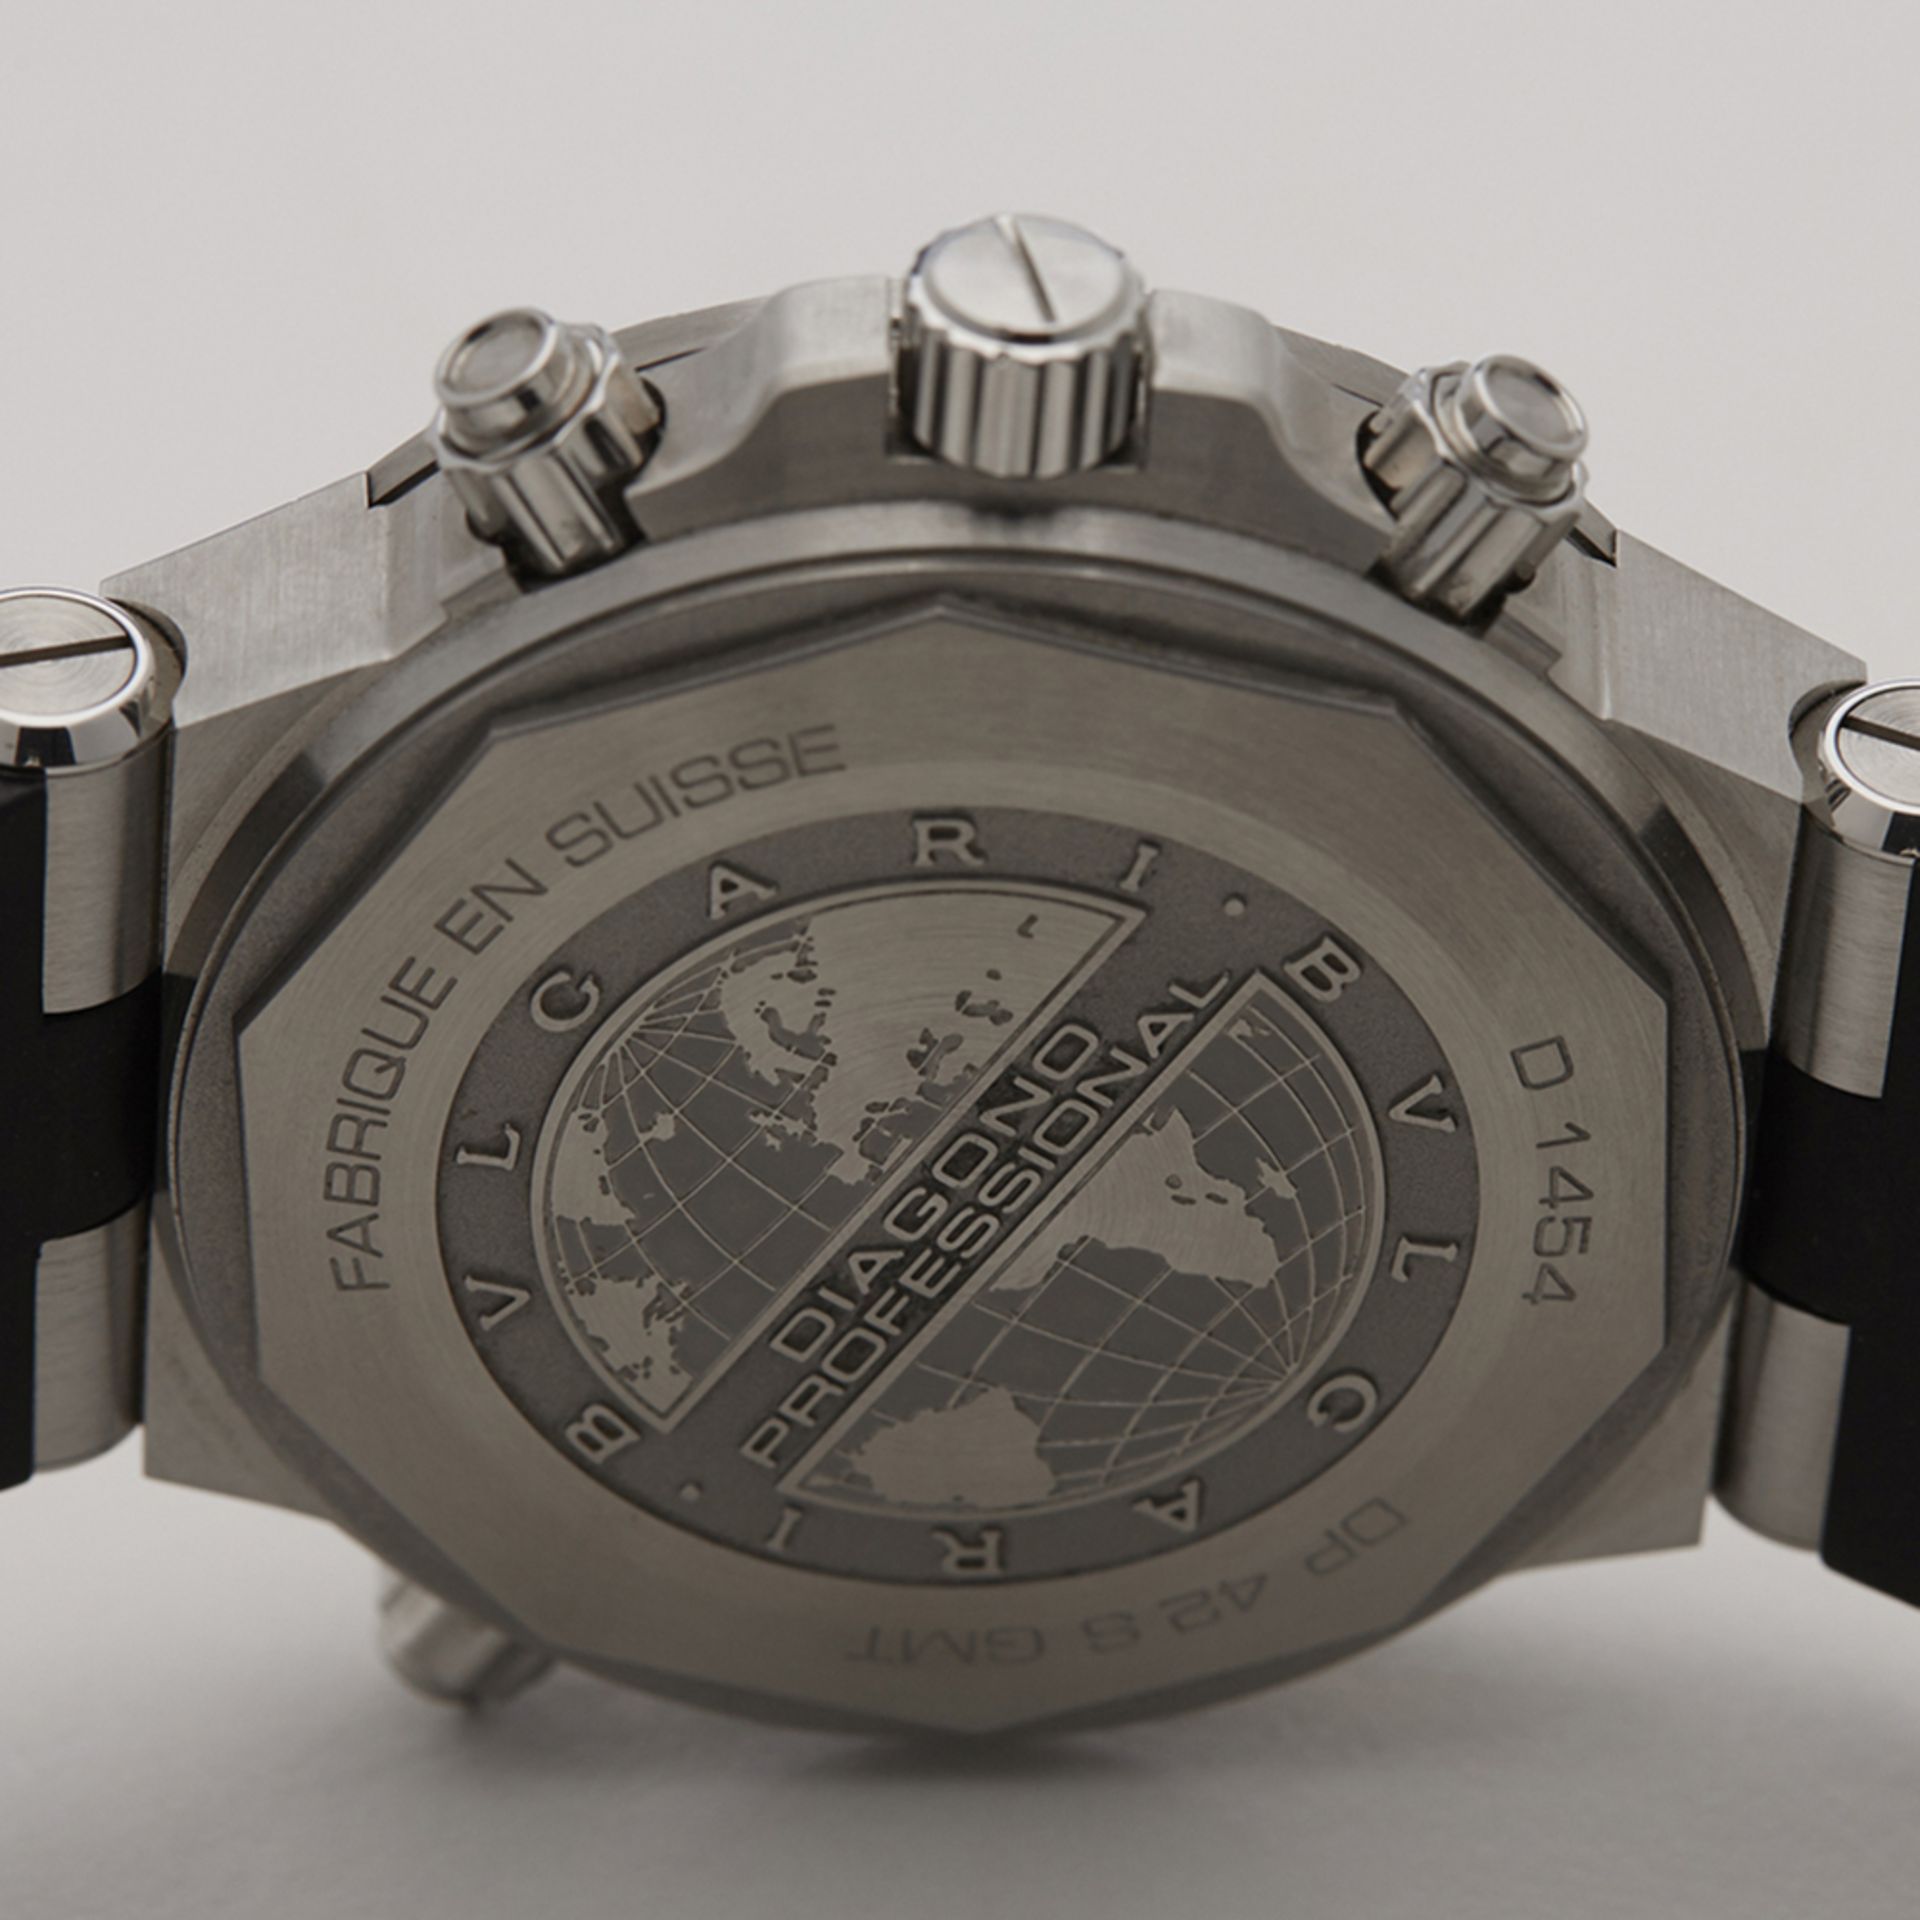 Bulgari, Diagono GMT 42mm Stainless Steel DP 42 S GMT - Image 8 of 9